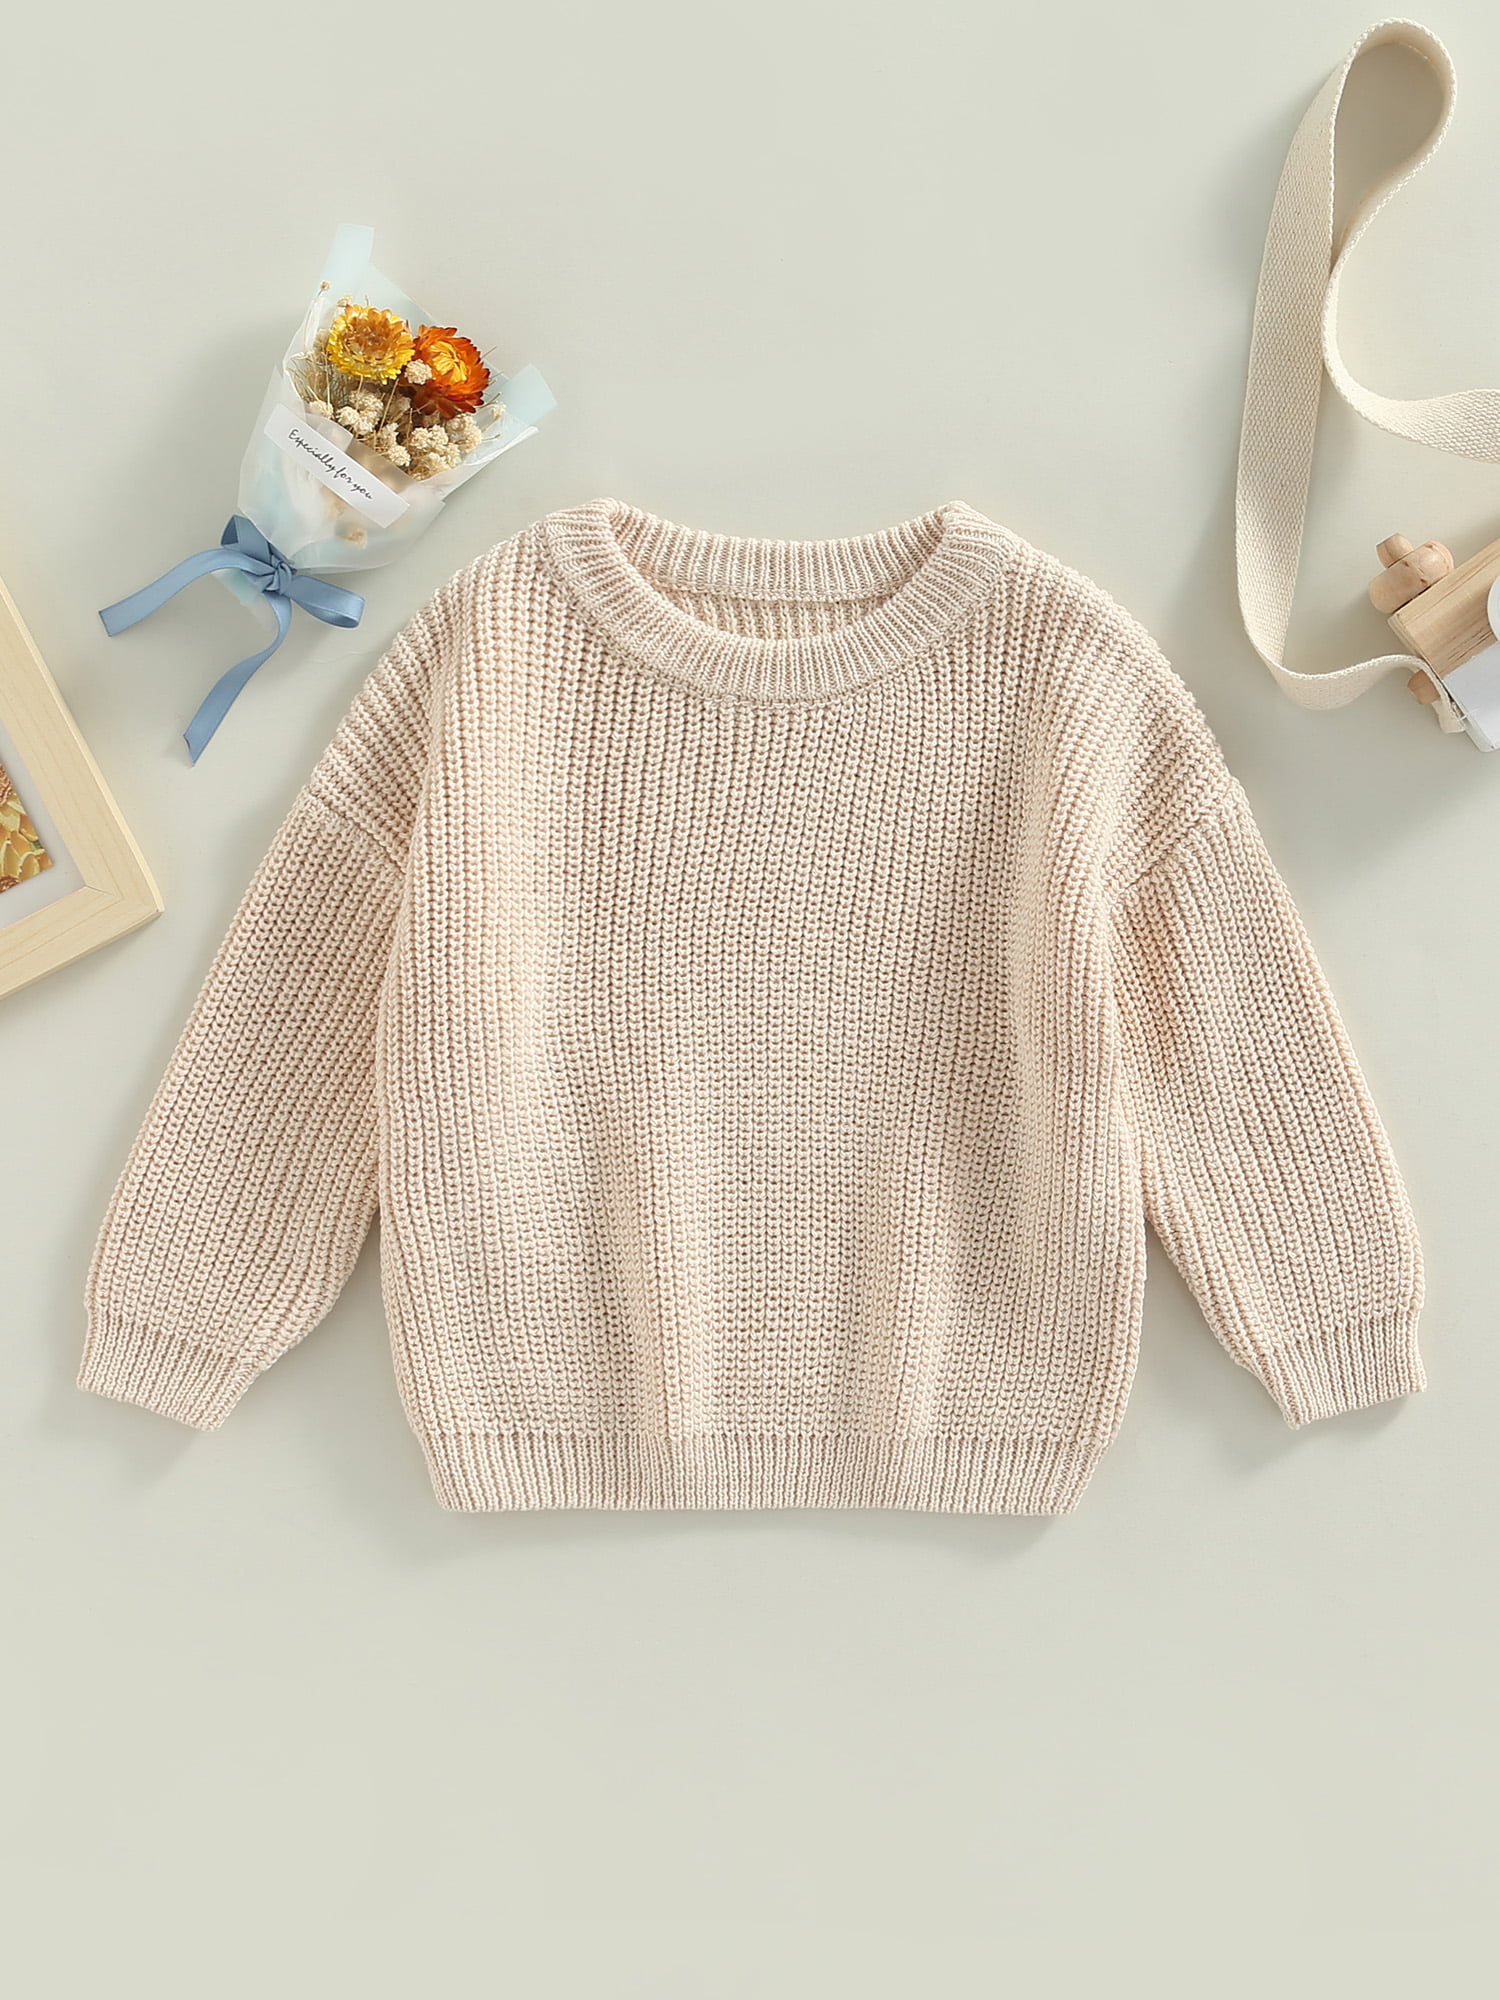 Afunbaby Baby Girl Boy Knit Sweater Blouse Pullover Sweatshirt Warm Crewneck Long Sleeve Tops for Infant Toddler 